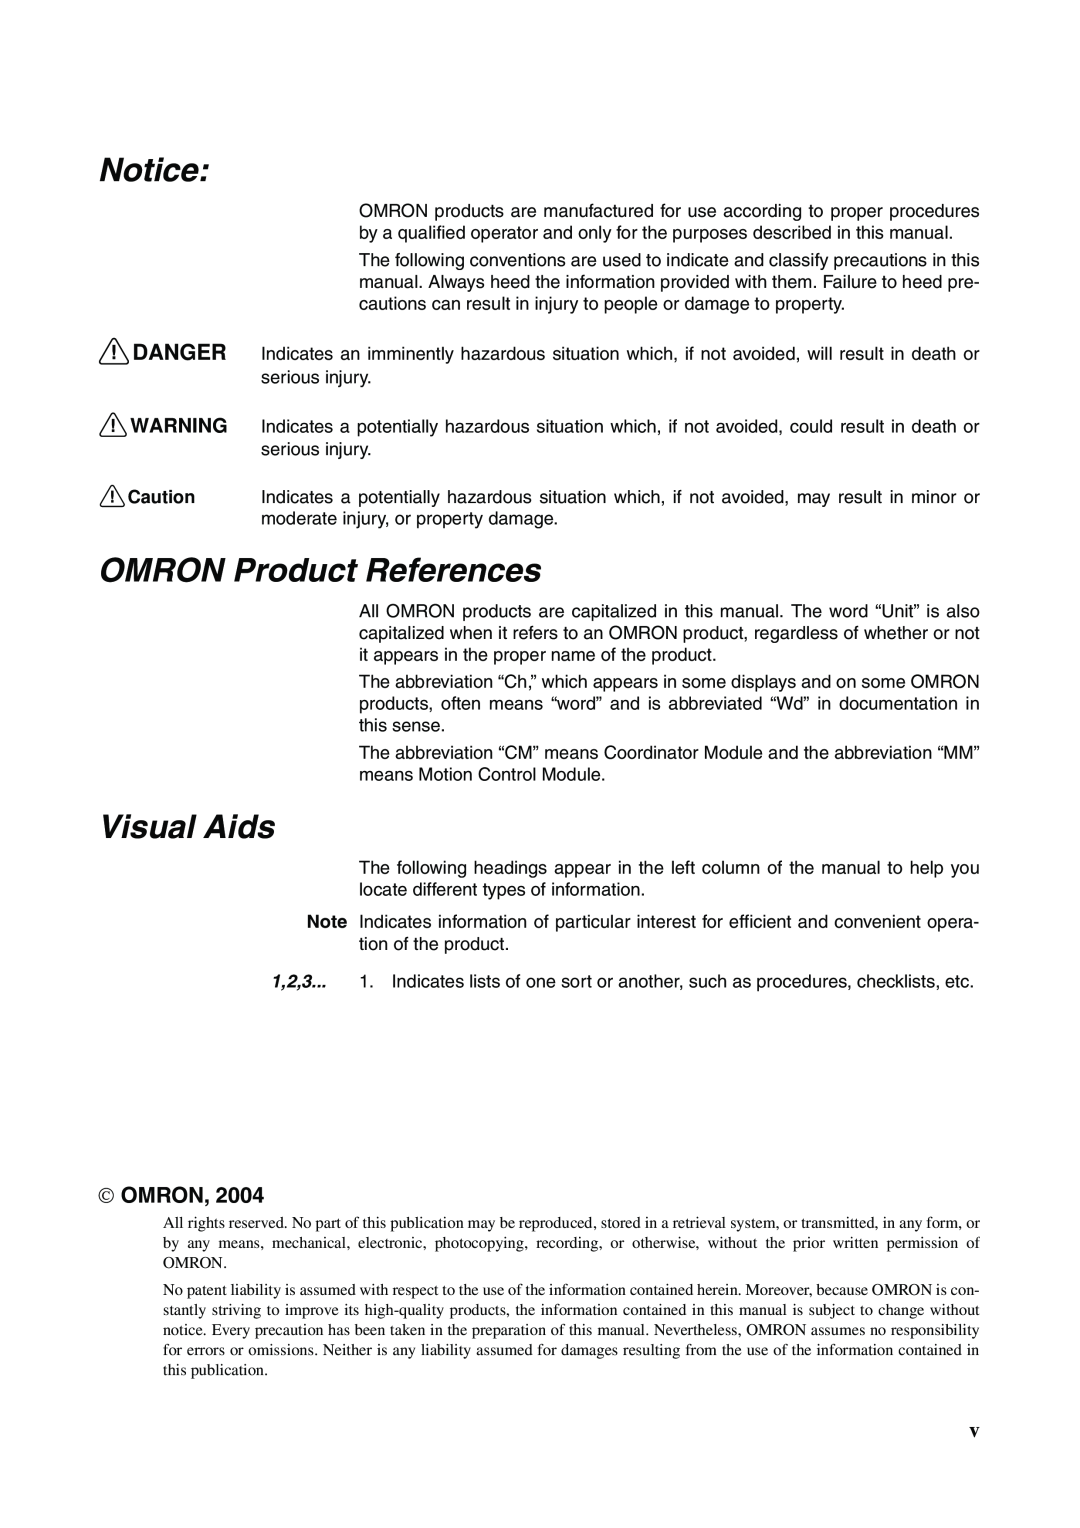 Omron FQM1-MMA21, FQM1-CM001, FQM1-MMP21 operation manual Notice, OMRON Product References, Visual Aids, Omron 